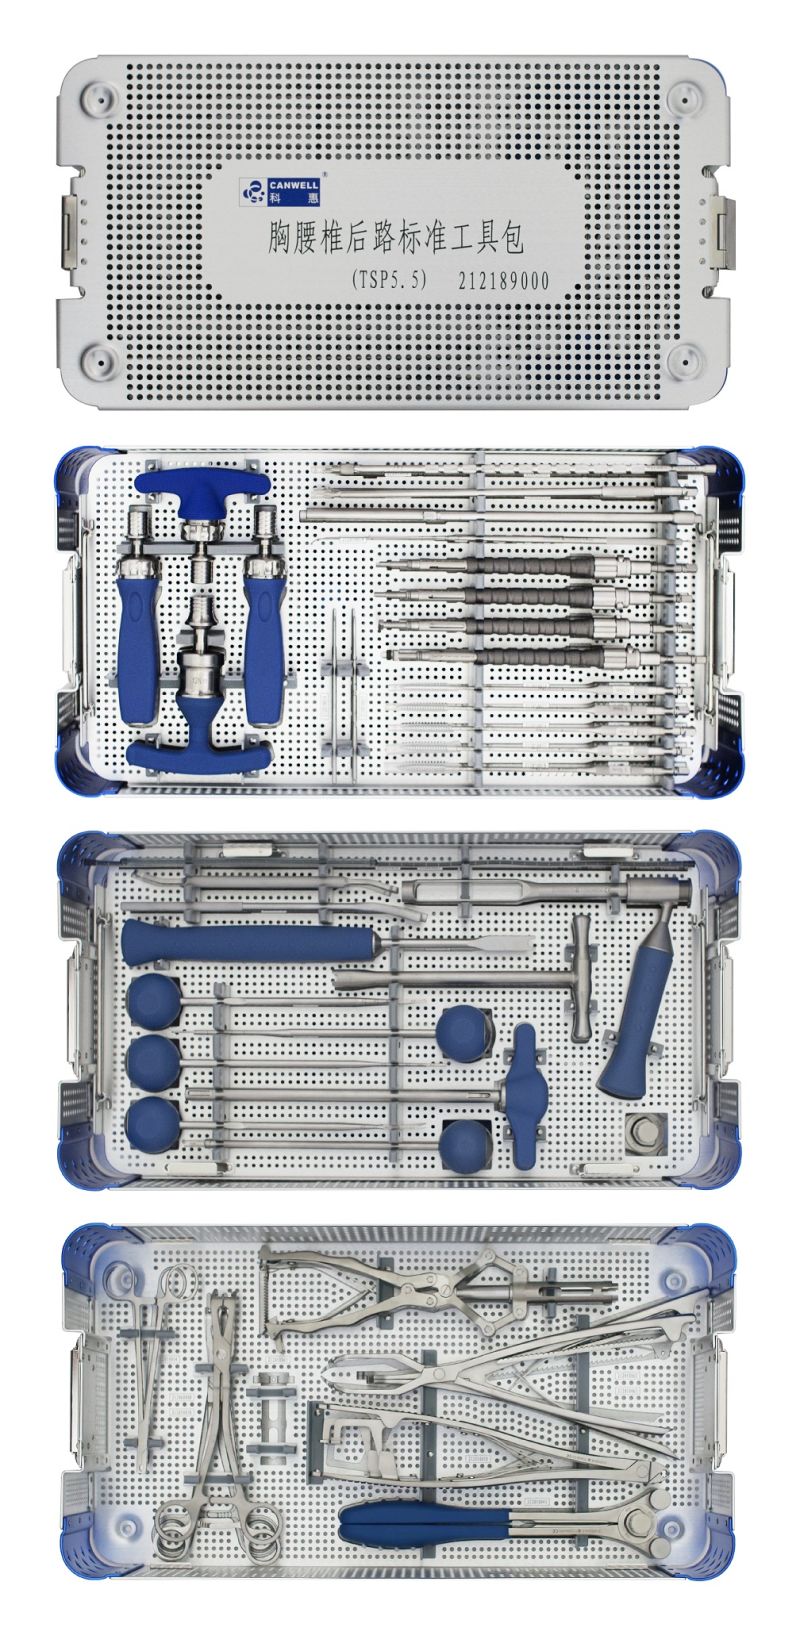 Canwell Orthopedic Spine Instrument Pedical Screw Lumbar Spinal Set